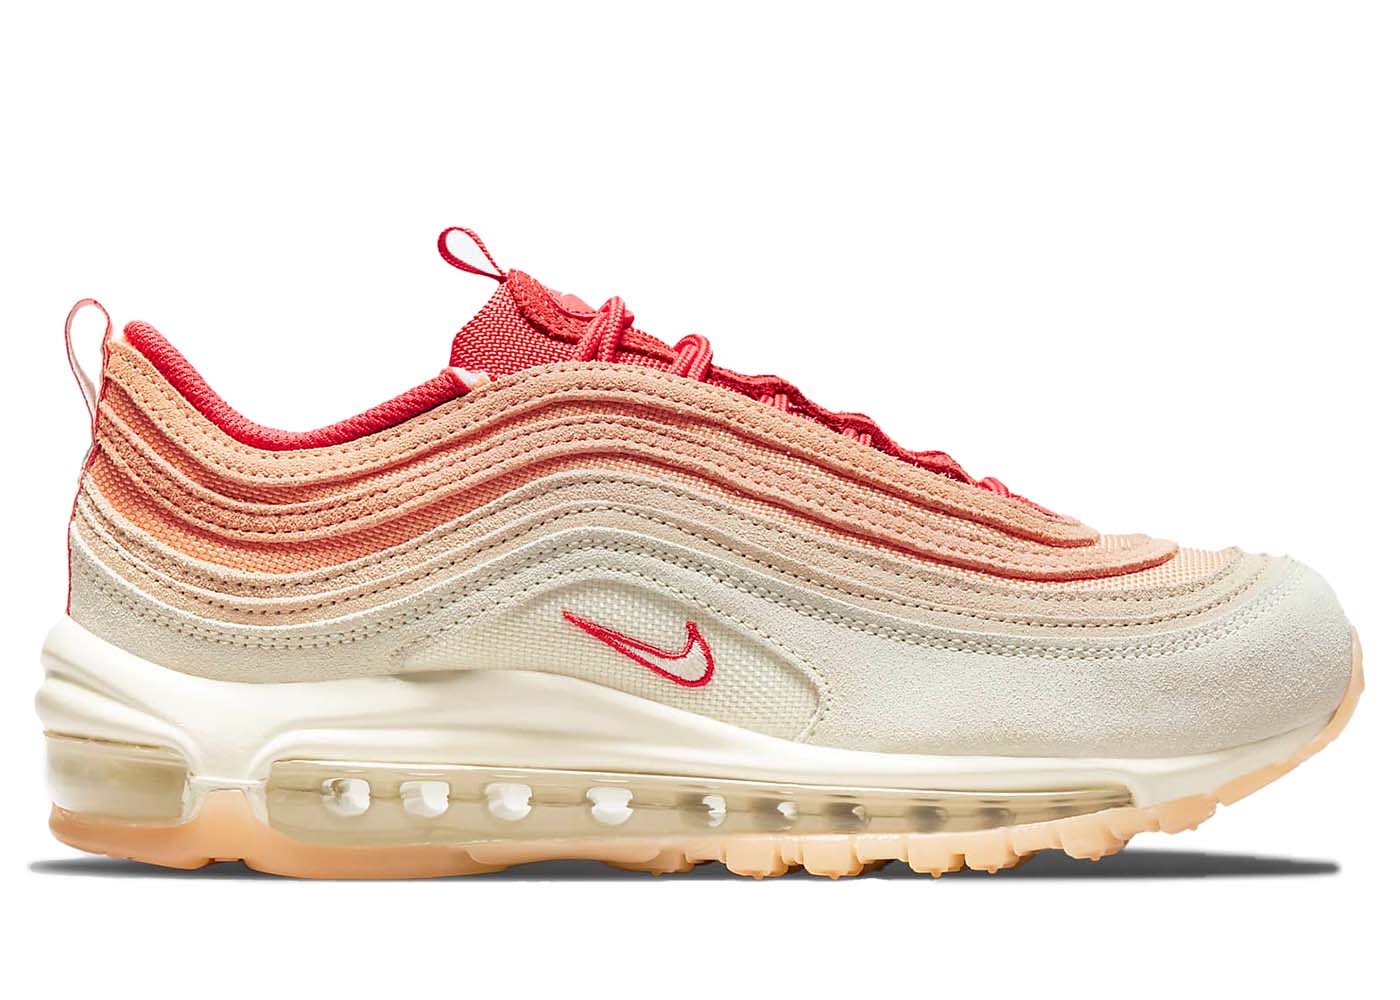 Nike Air Max 97 Barely Rose (Women's) - AR1911-600 - US